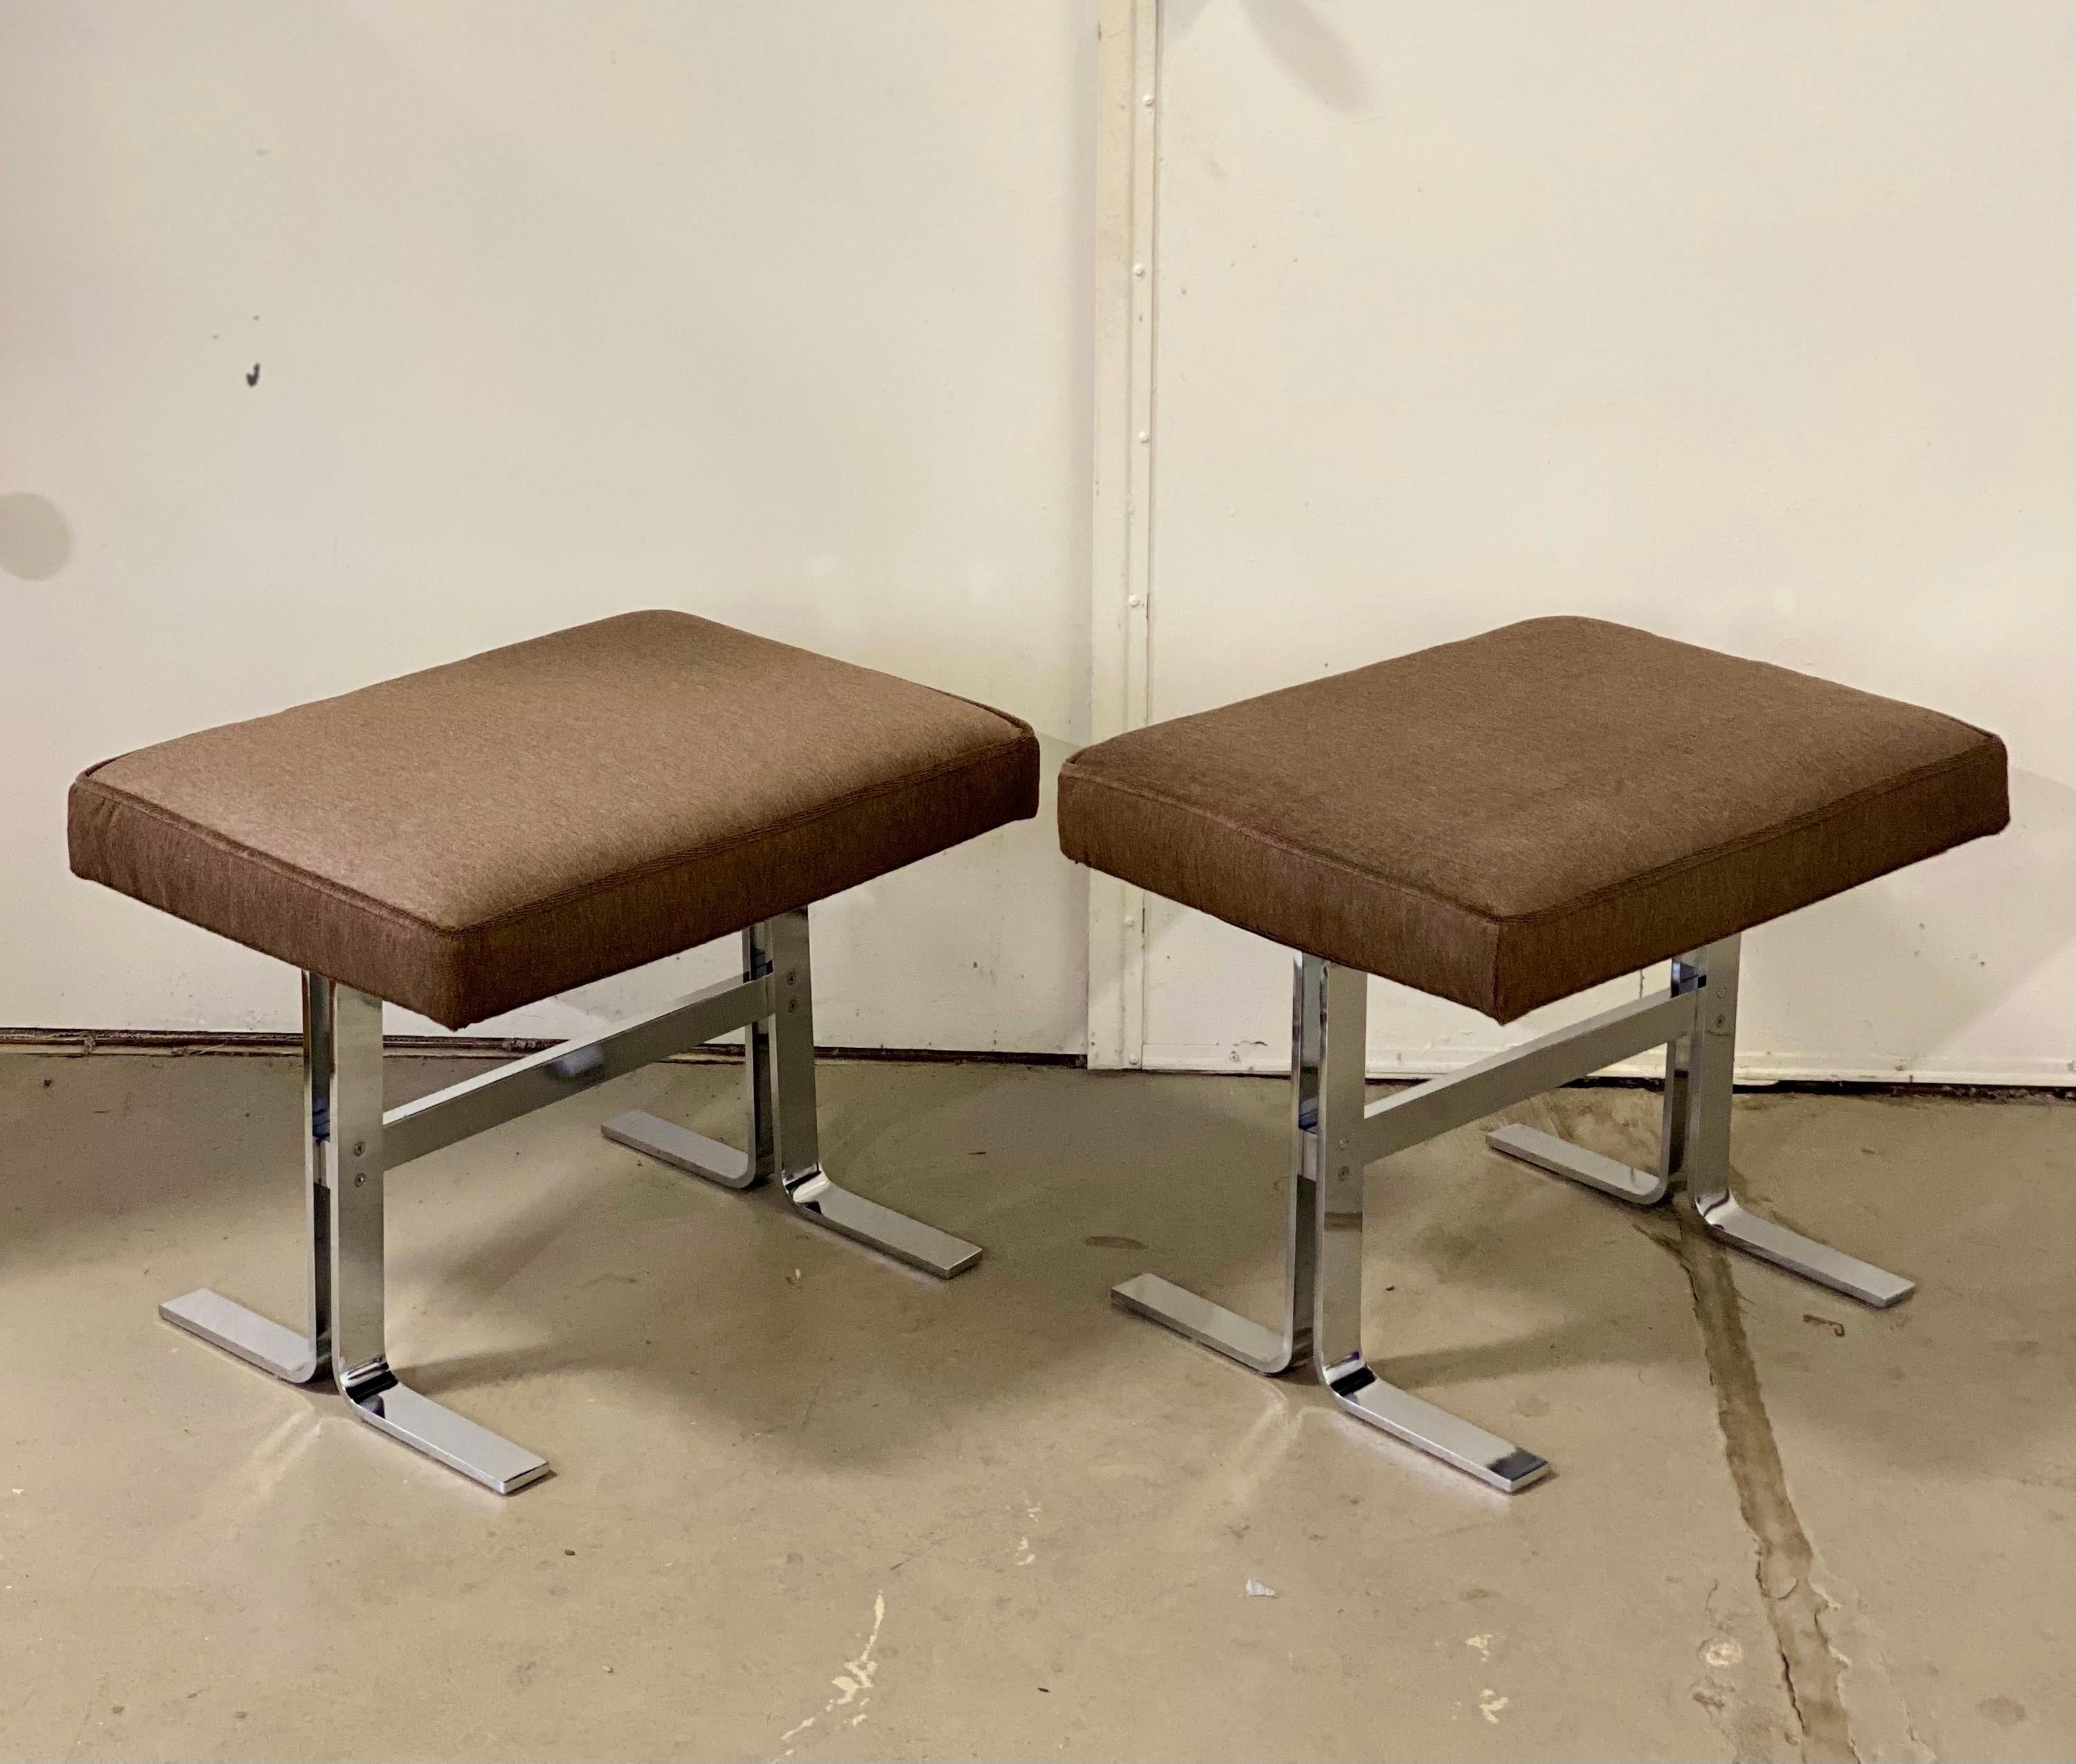 We are very pleased to offer a pair of sophisticated ottomans by the Design Institute of America, circa the 1970s. Featuring a clean Silhouette, these beautiful ottomans showcase sturdy, polished chrome finish bases paired with new upholstered seats